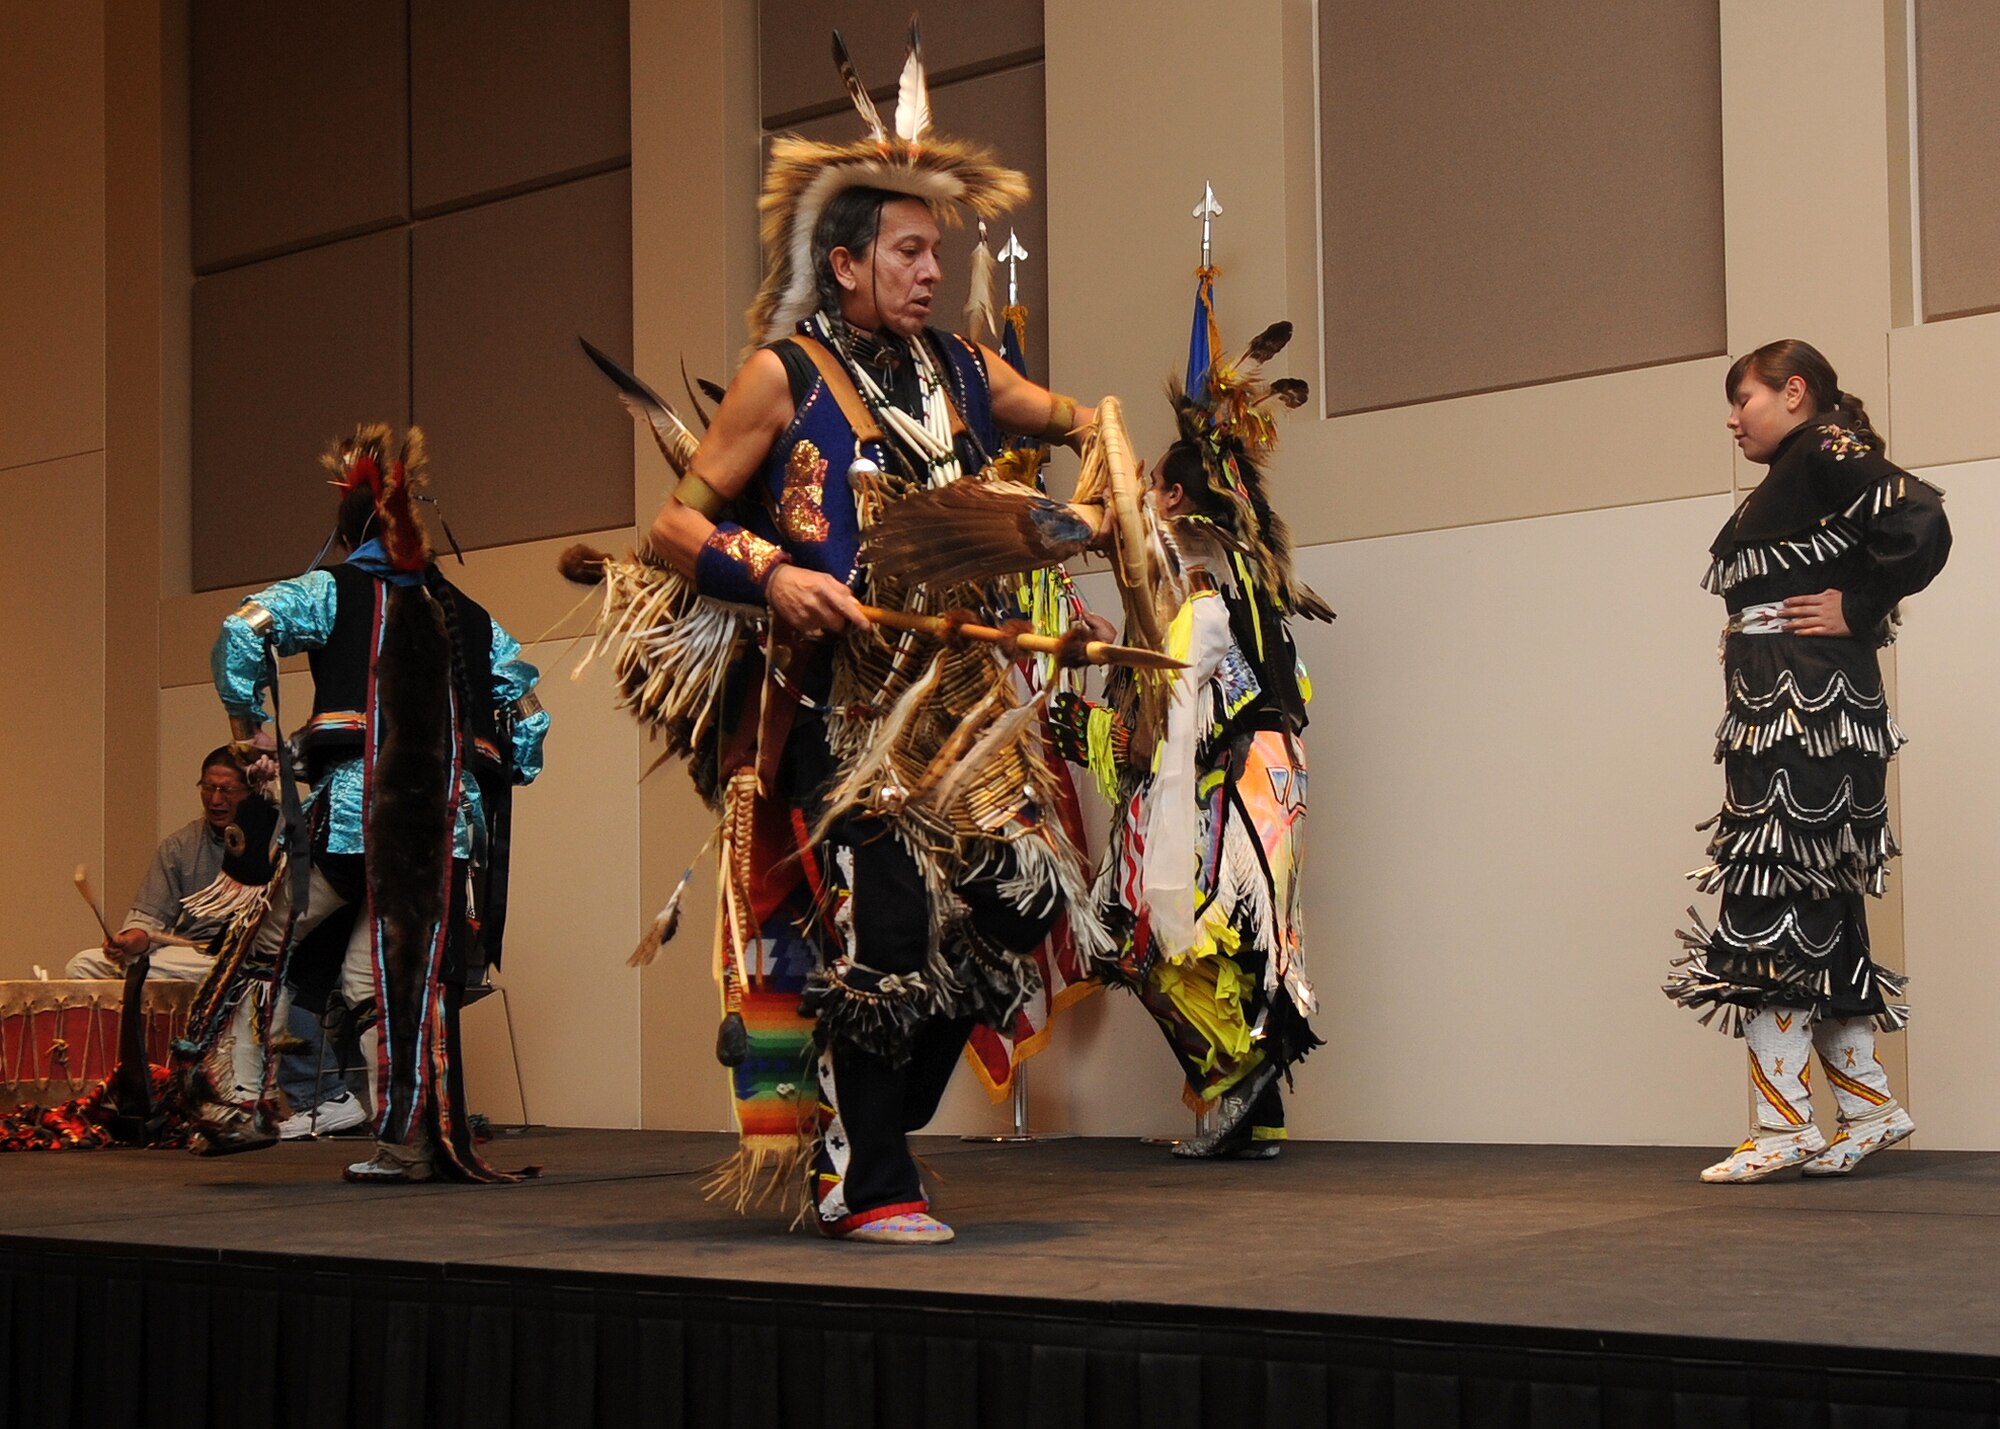 Buckley Air Force Base, Colo.-  Dancers from the Denver Indian Center perform the "Crow Hop". Members of different tribes performed this intertribal dance together. ( U.S. Air Force Photo by Airman 1st Class Marcy Glass )
